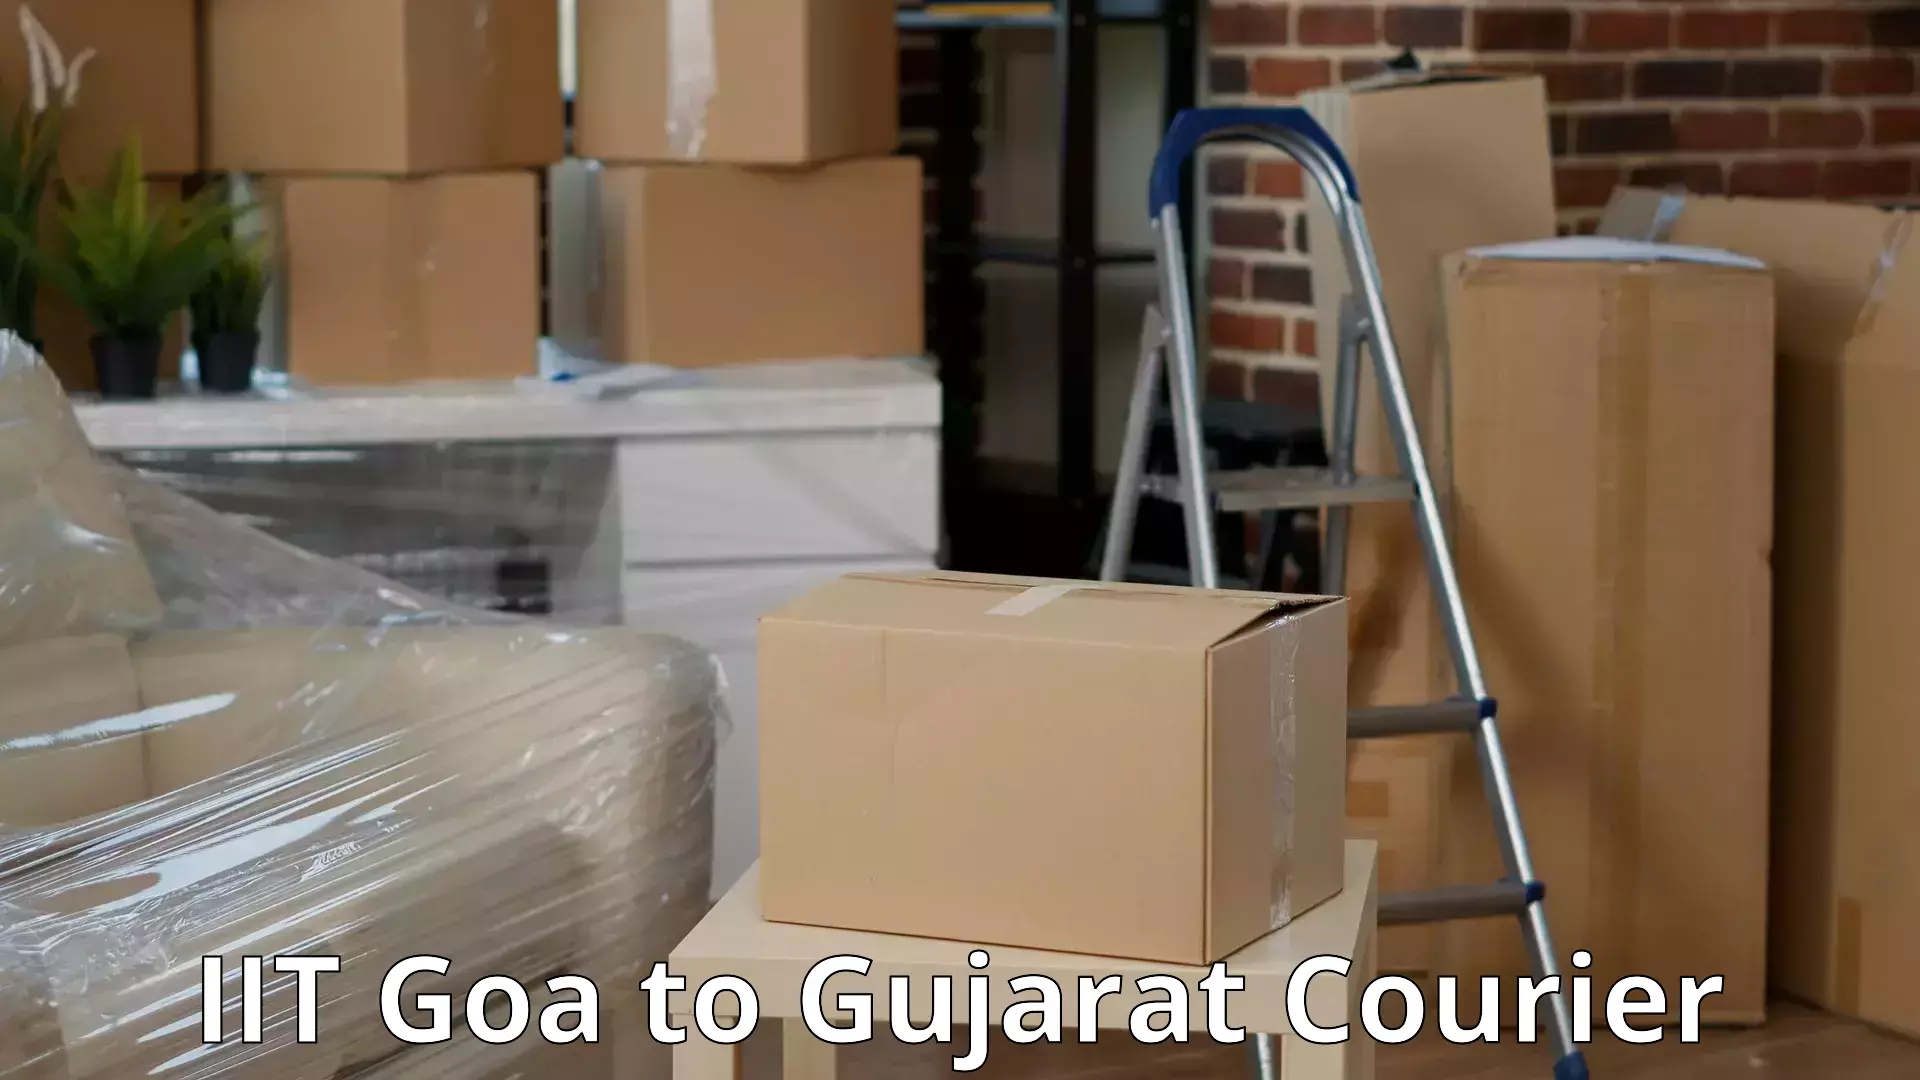 Trusted relocation services IIT Goa to Gujarat